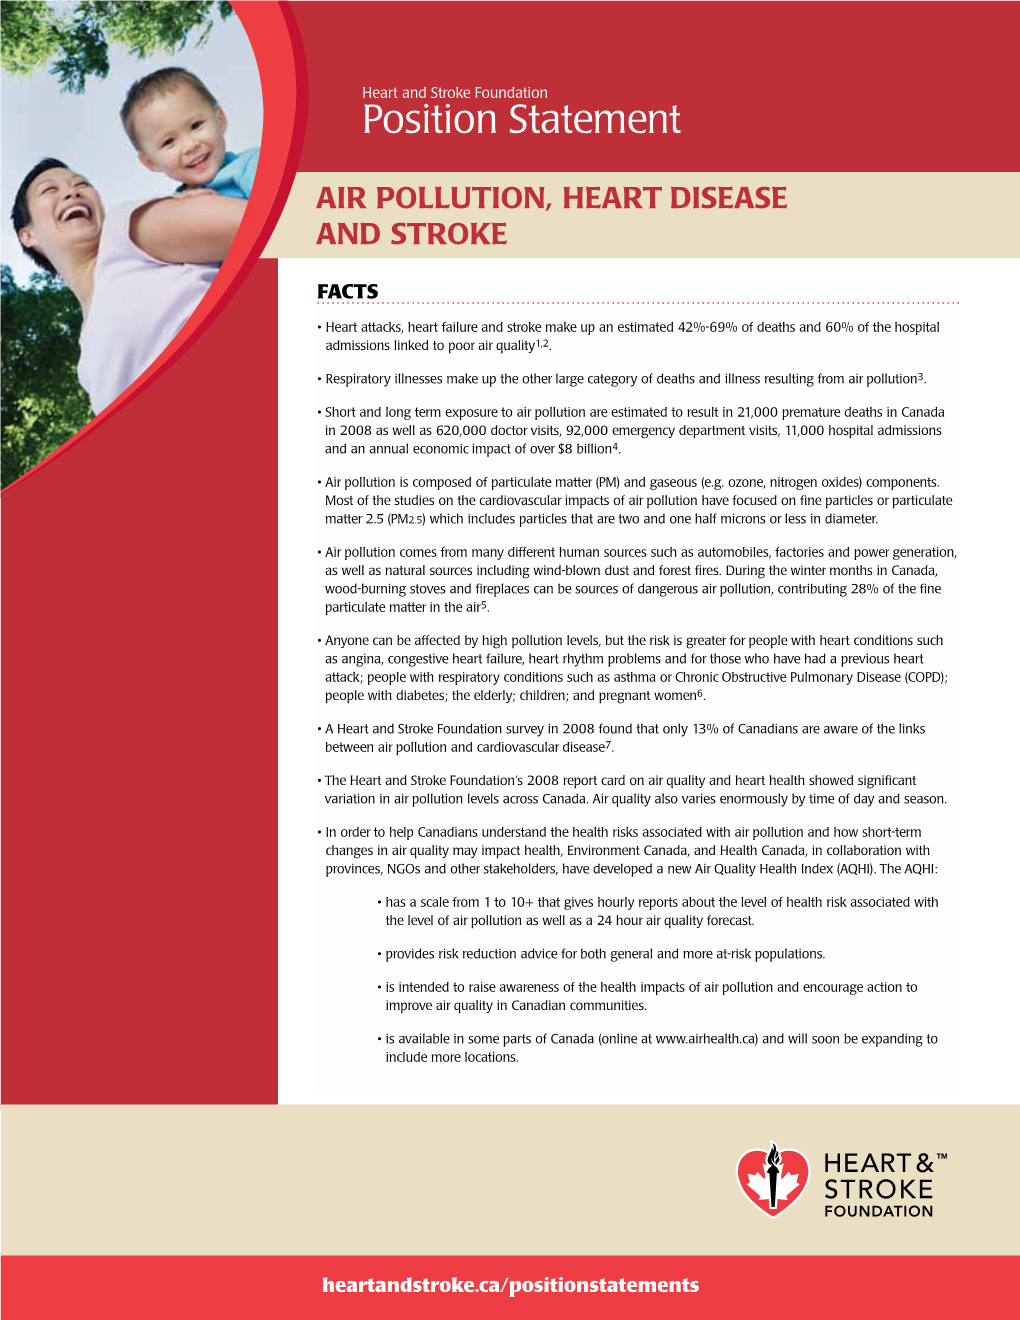 Air Pollution, Heart Disease and Stroke